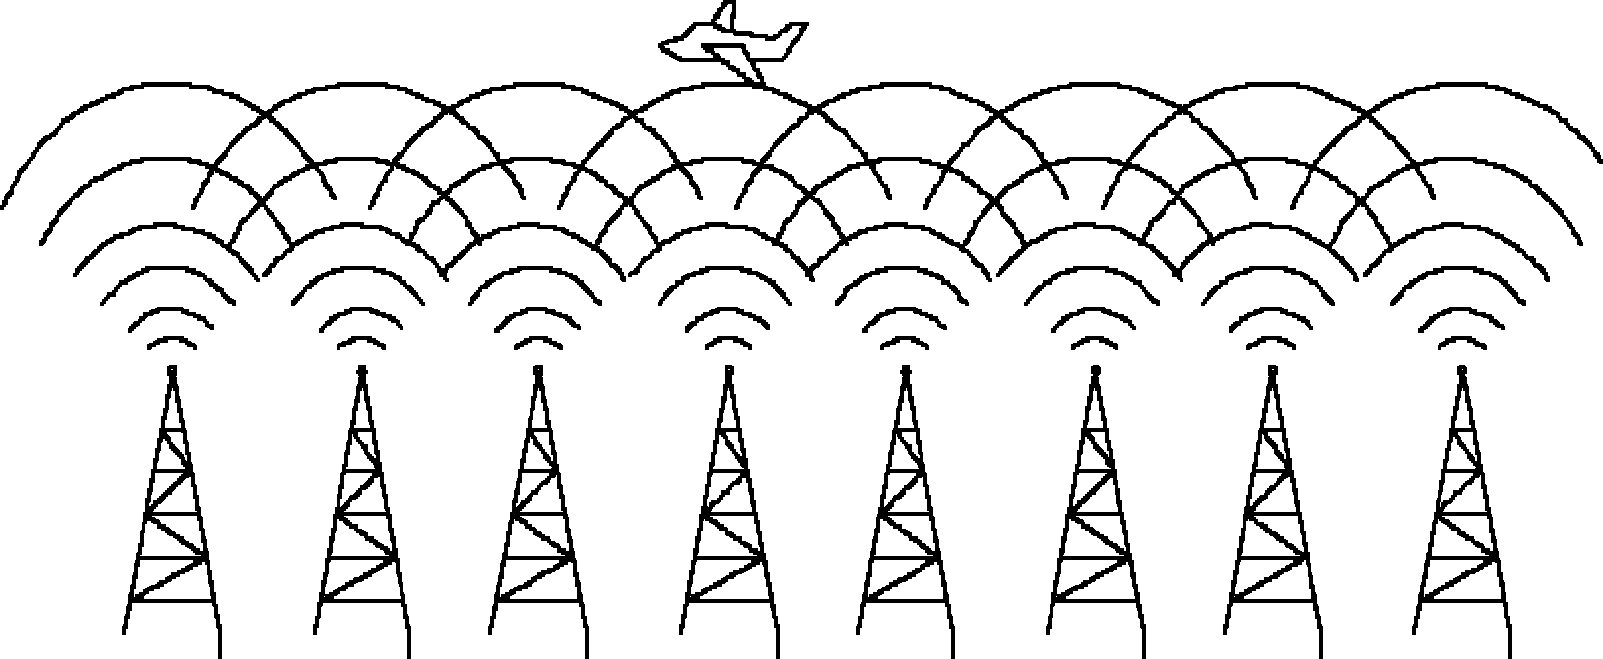 Advanced method for realizing safety of aviation airspace through network computation